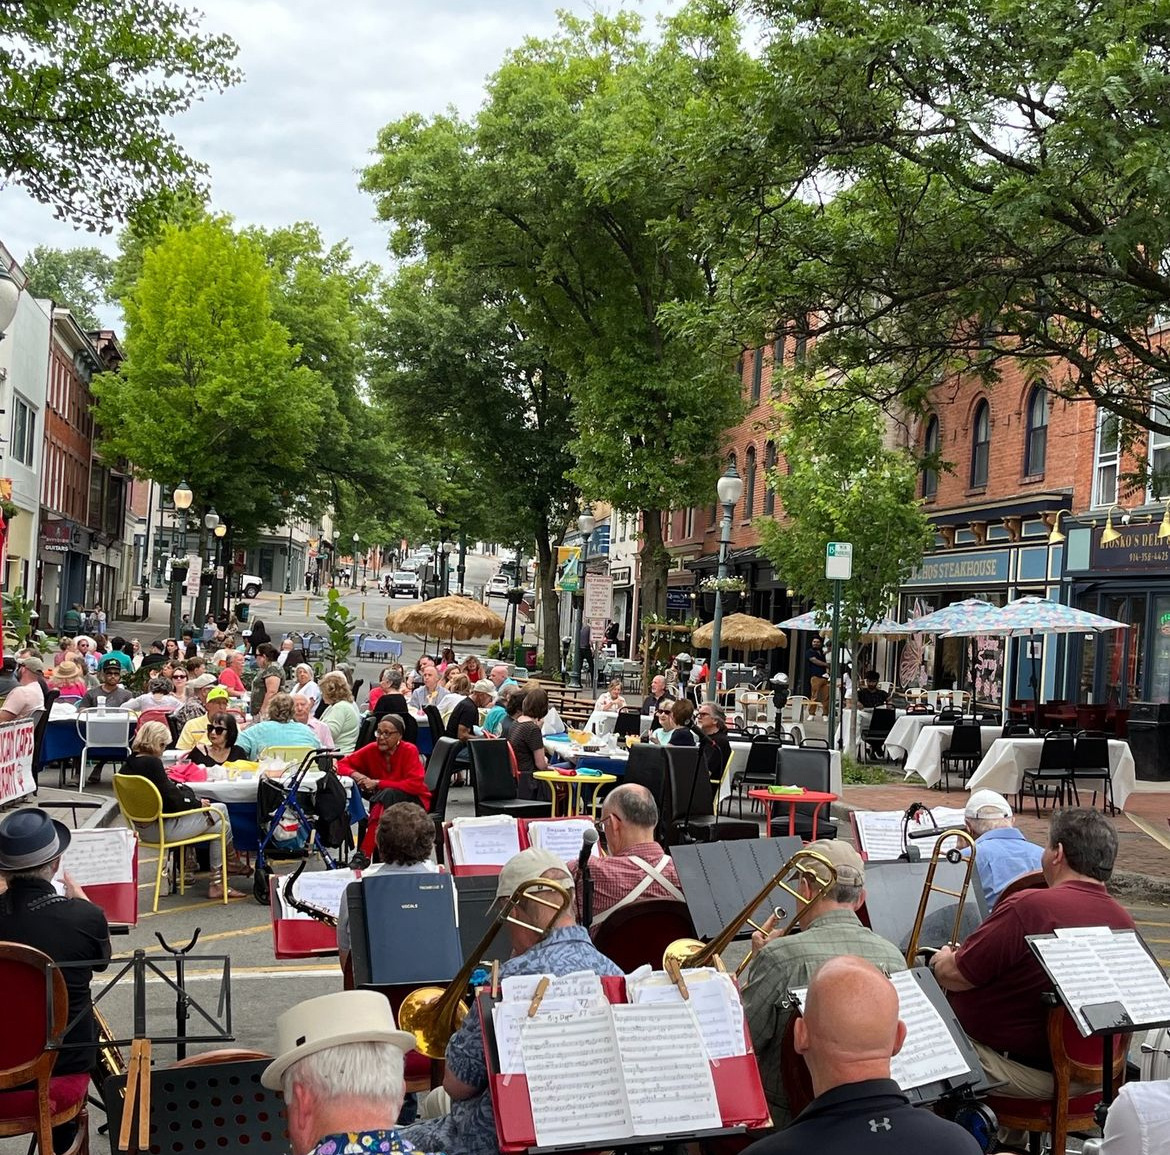 This area of the downtown is being considered for a smoking ban. (Photo courtesy of Peekskill Walks)